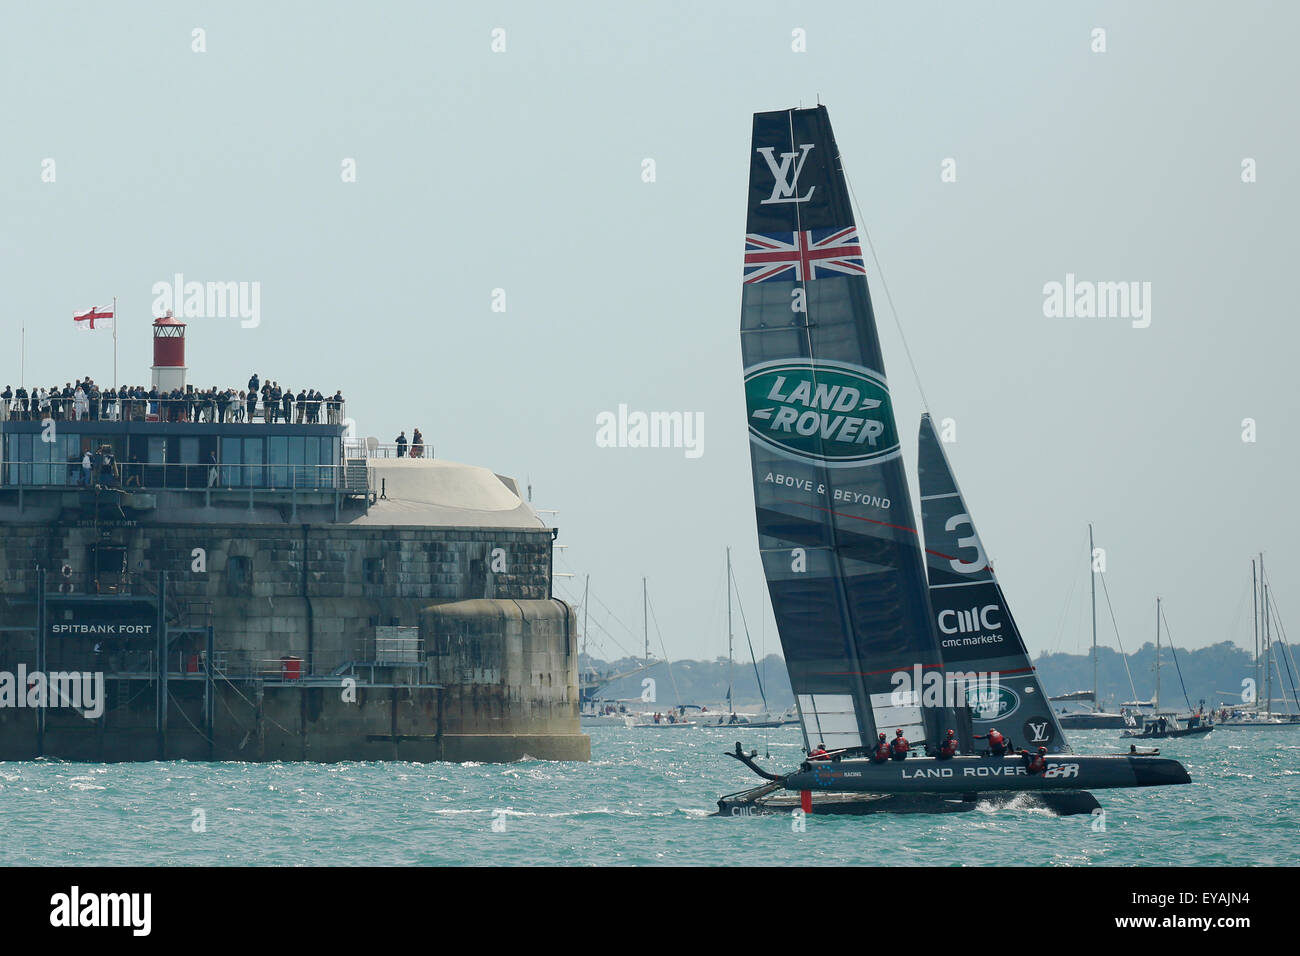 Portsmouth, UK. 25th July, 2015. Britain's Land Rover BAR (Ben Ainslie Racing) passes SPitbank Fort as they compete in the first official race of the 35th America's Cup World Series Races at Portsmouth in Hampshire, UK Saturday July 25, 2015. The 2015 Portsmouth racing of the Louis Vuitton America's Cup World Series counts towards the qualifiers and playoffs which determine the challenger to compete against the title holders Oracle Team USA in 2017. Credit:  Luke MacGregor/Alamy Live News Stock Photo